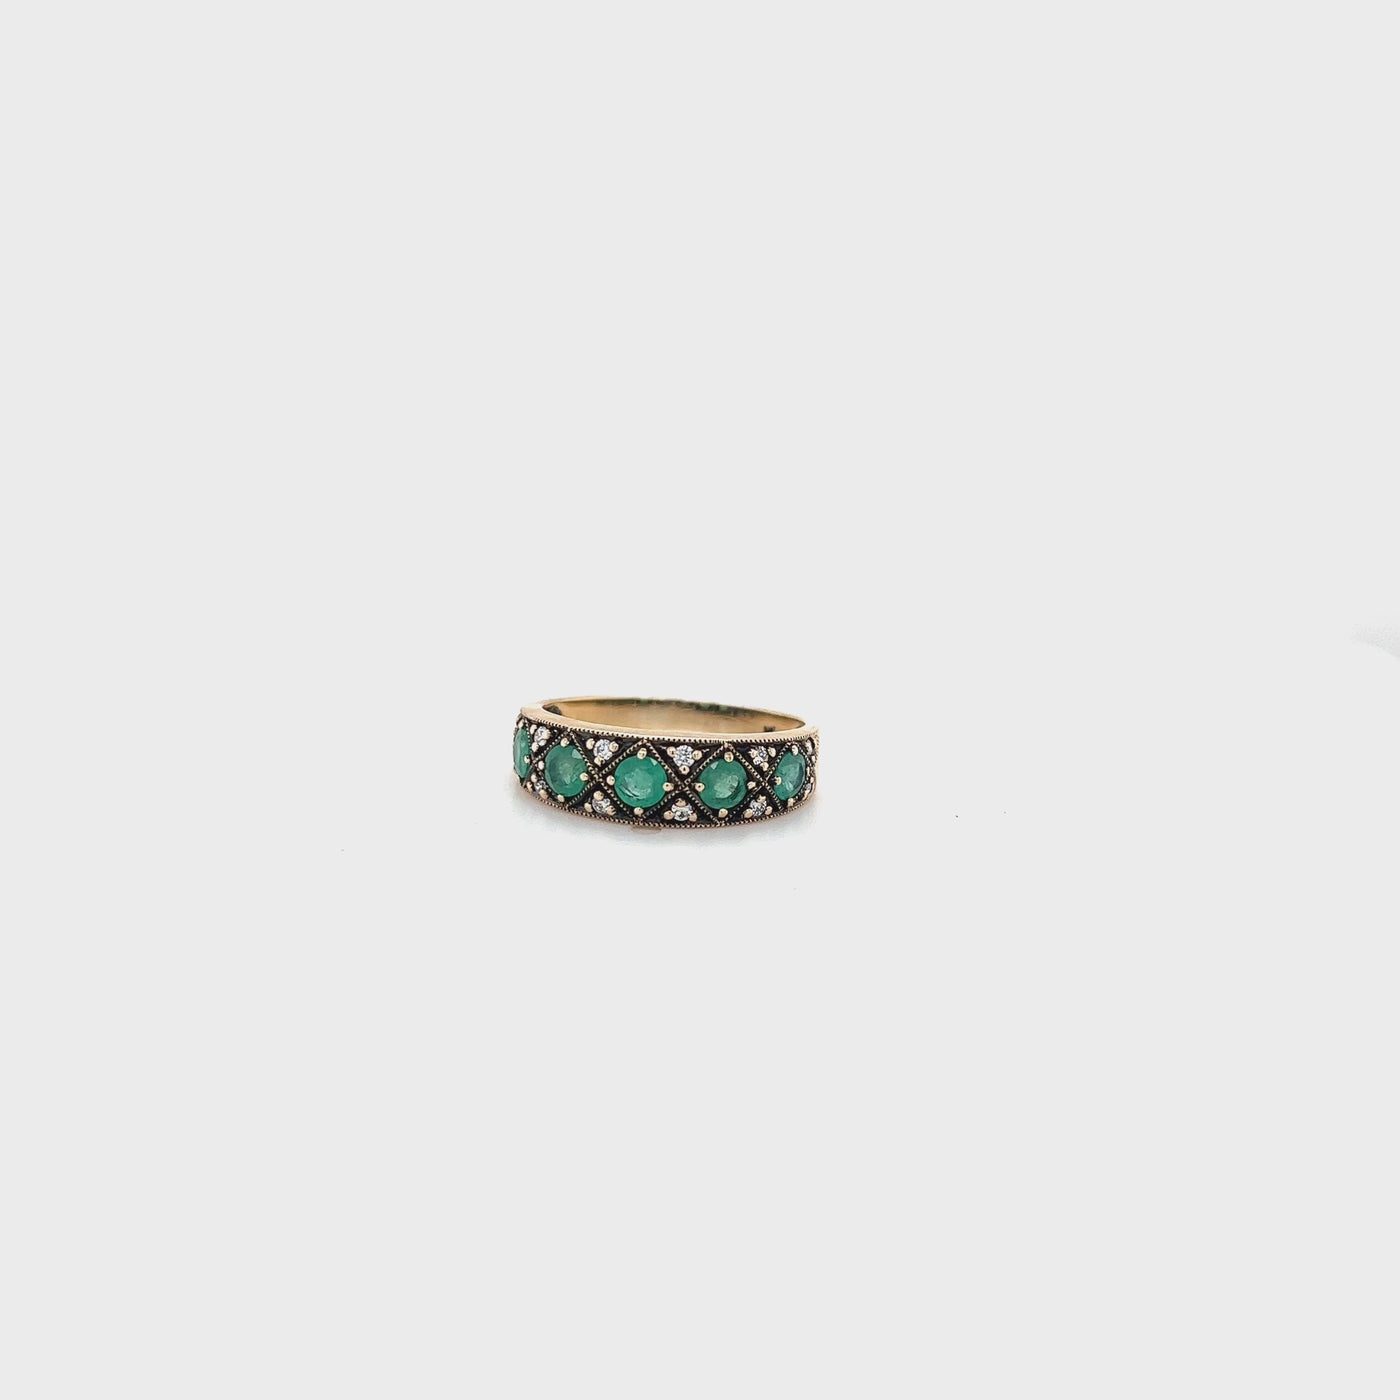 9 CARAT YELLOW GOLD RING WITH NATURAL EMERALD AND DIAMONDS